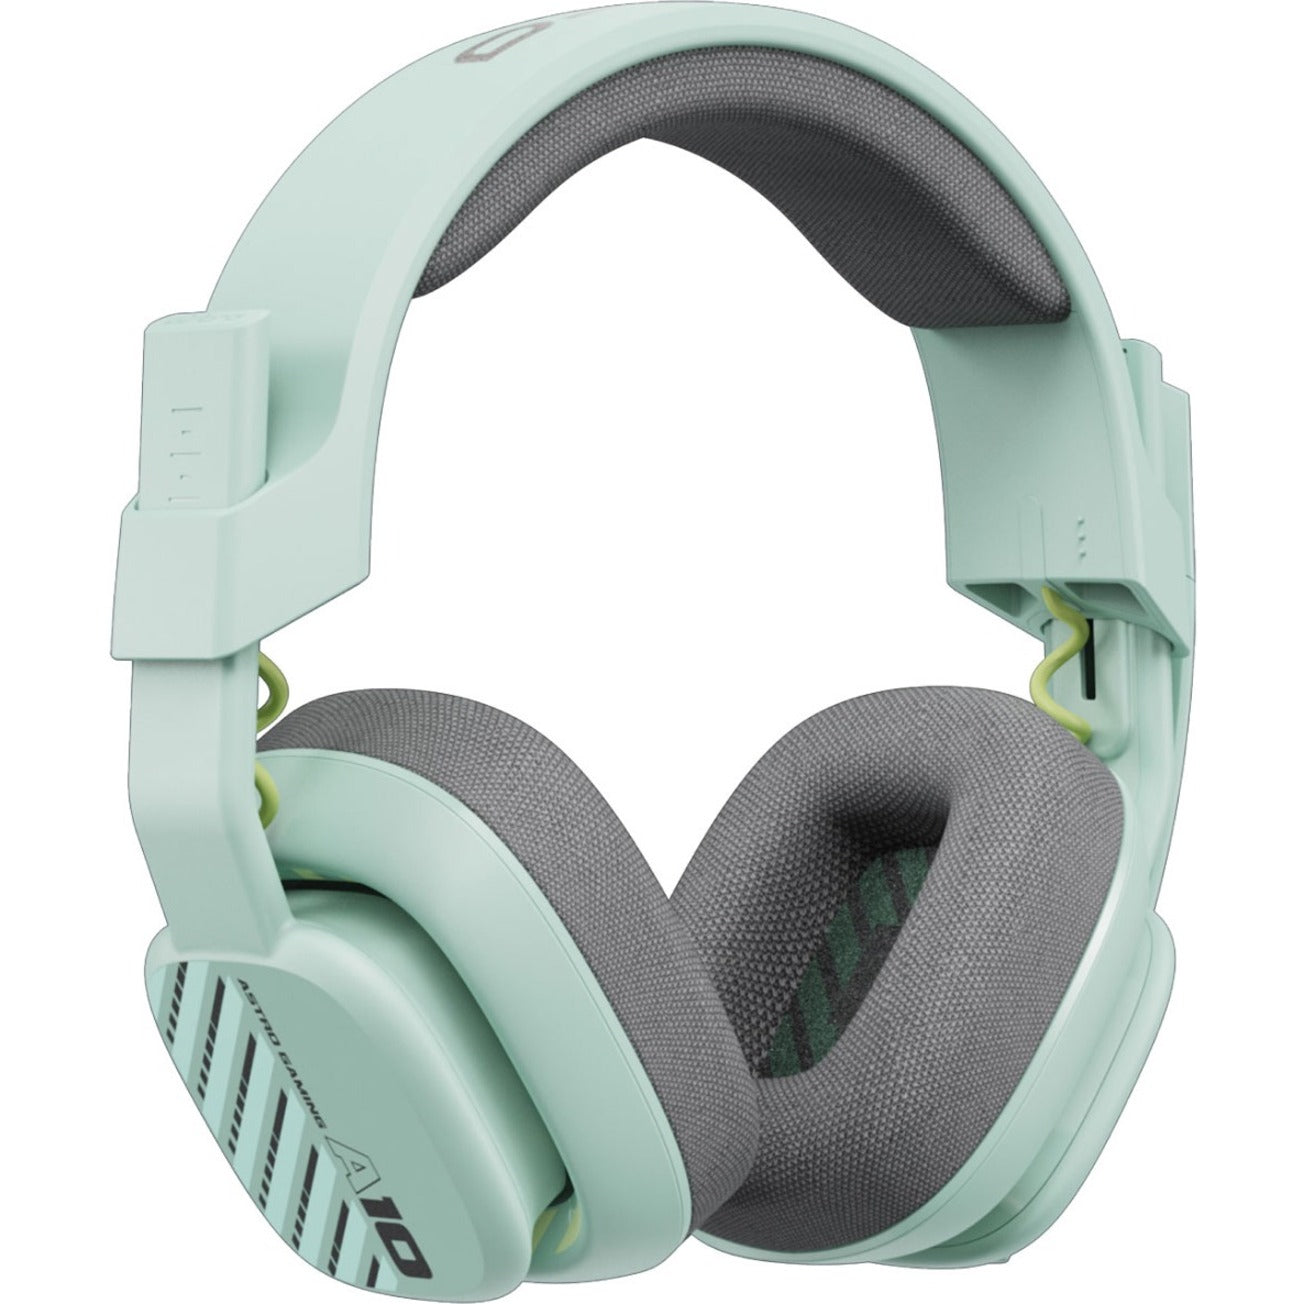 Astro 939-002083 A10 Headset, Over-the-ear Gaming Headset with Uni-directional Microphone, Mint Color